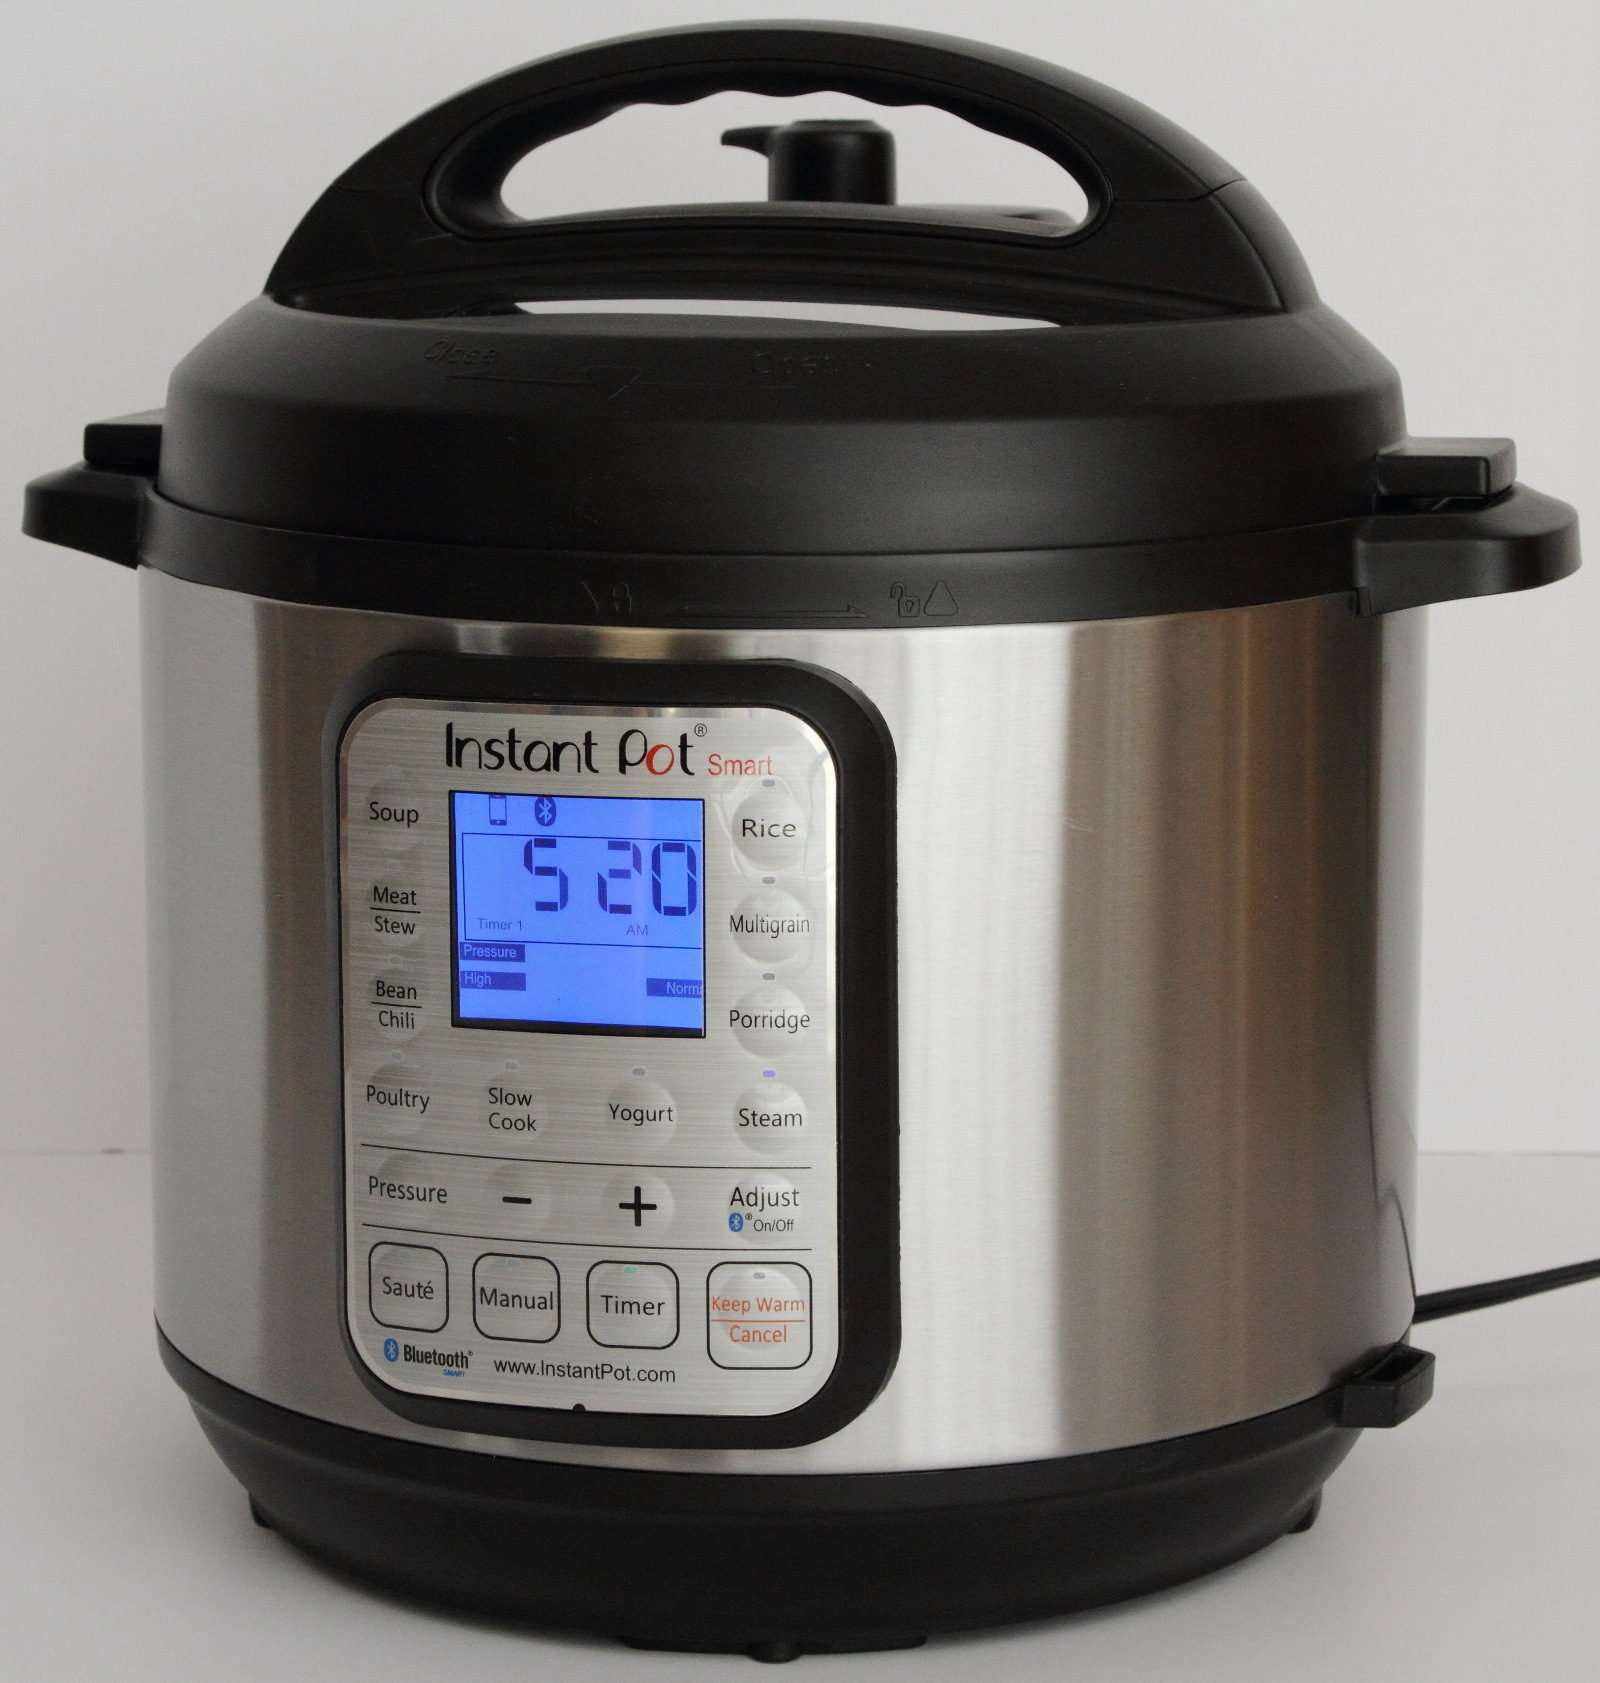 Limited number of Instant Pot pressure cookers recalled